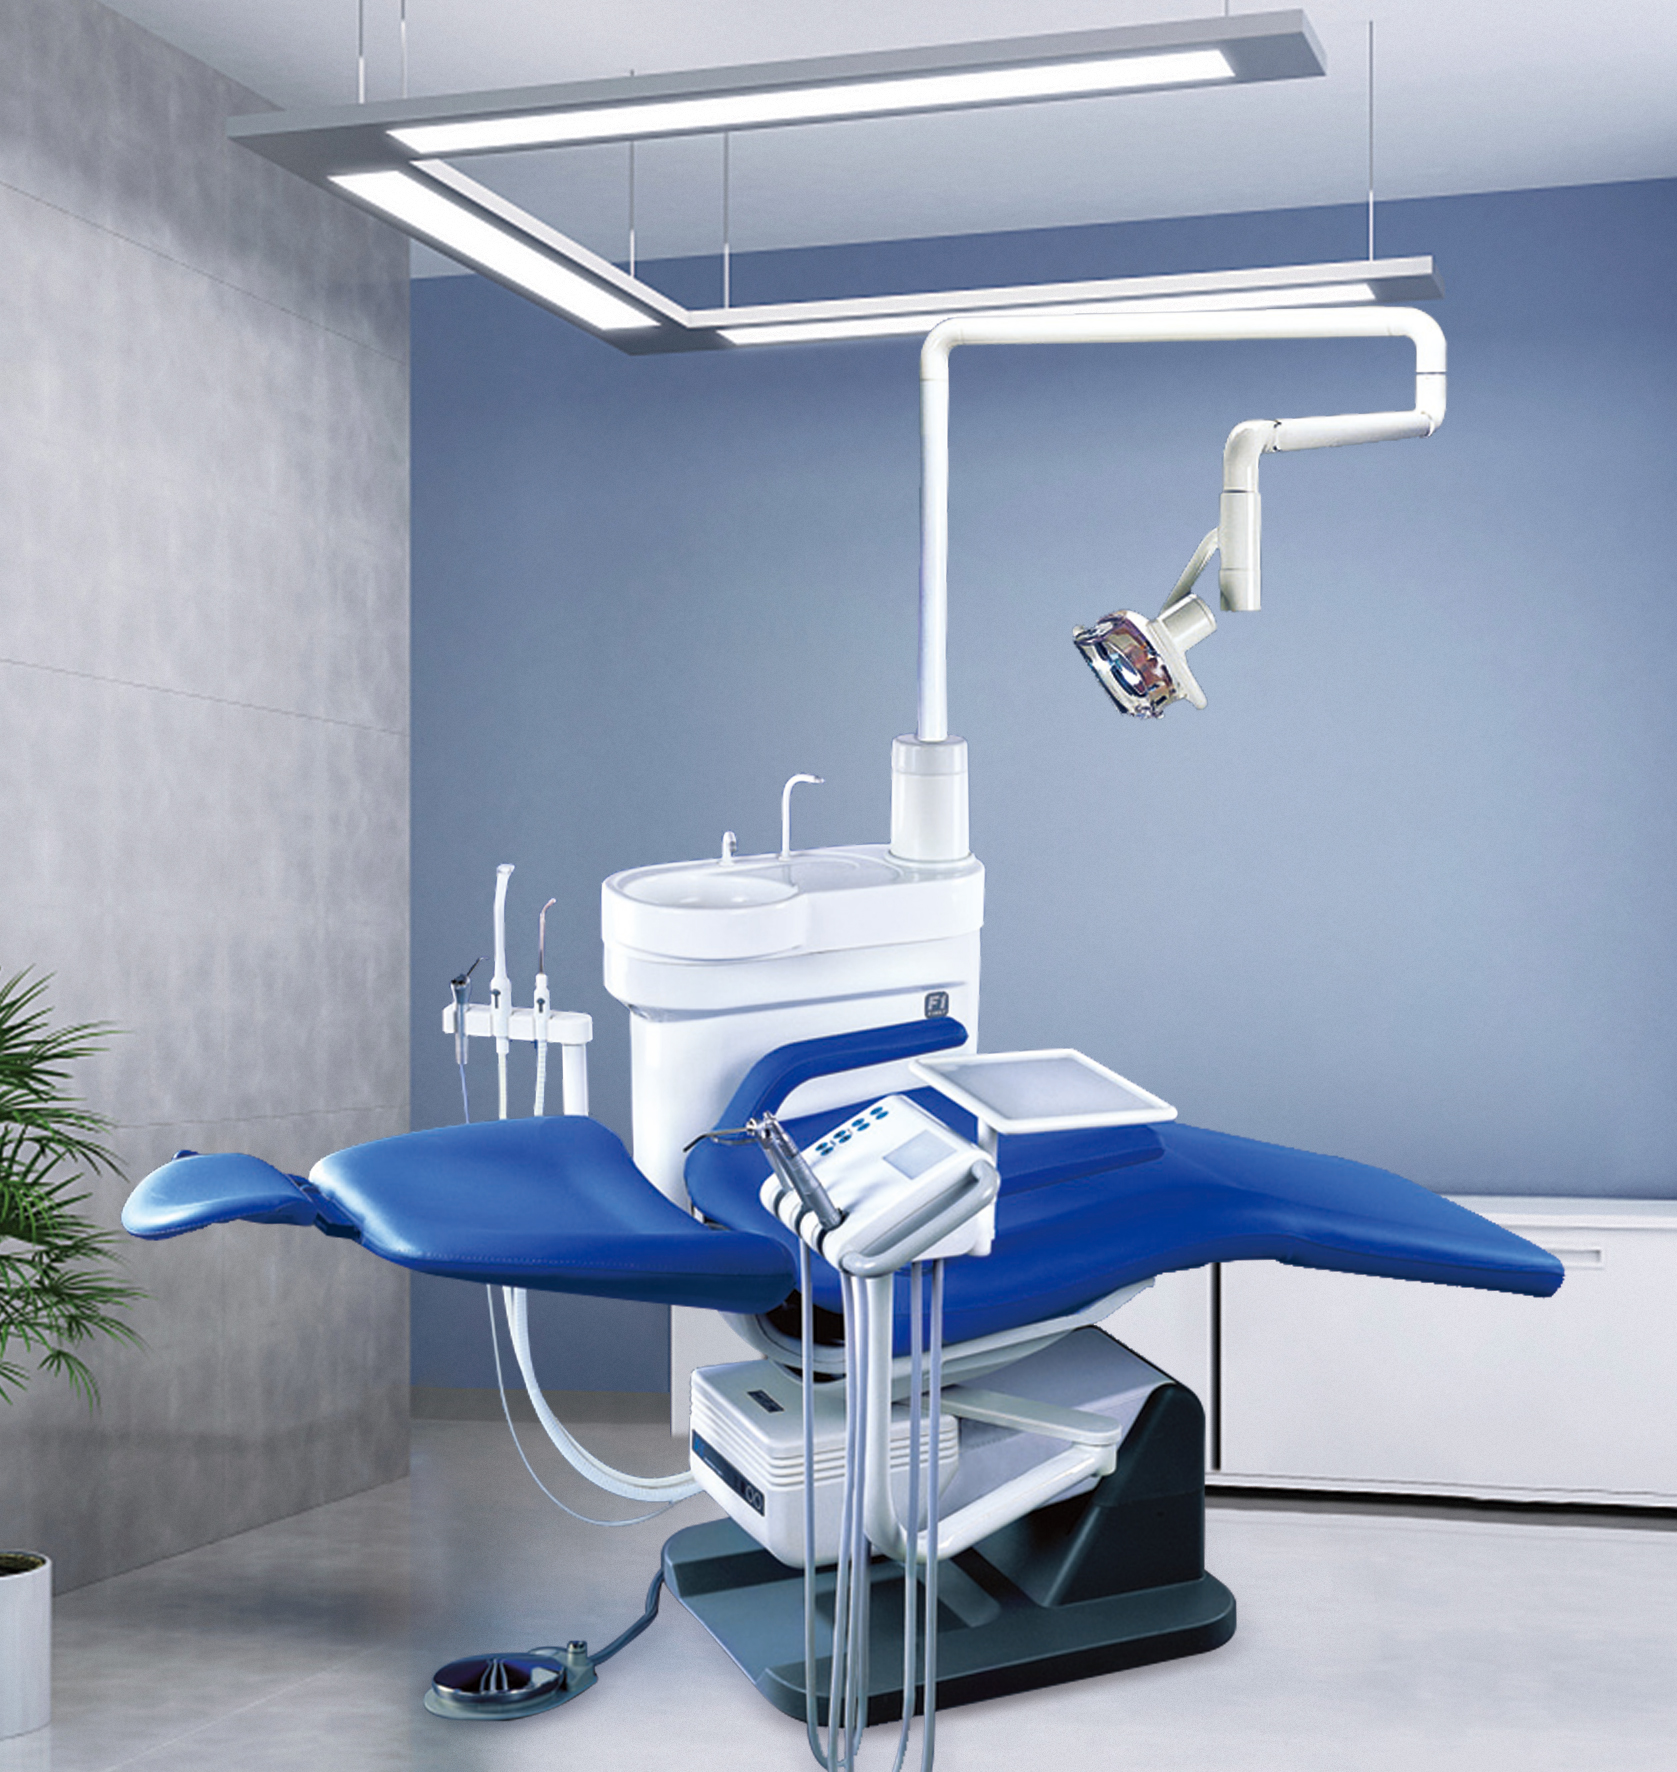 Chair-mounted dental unit